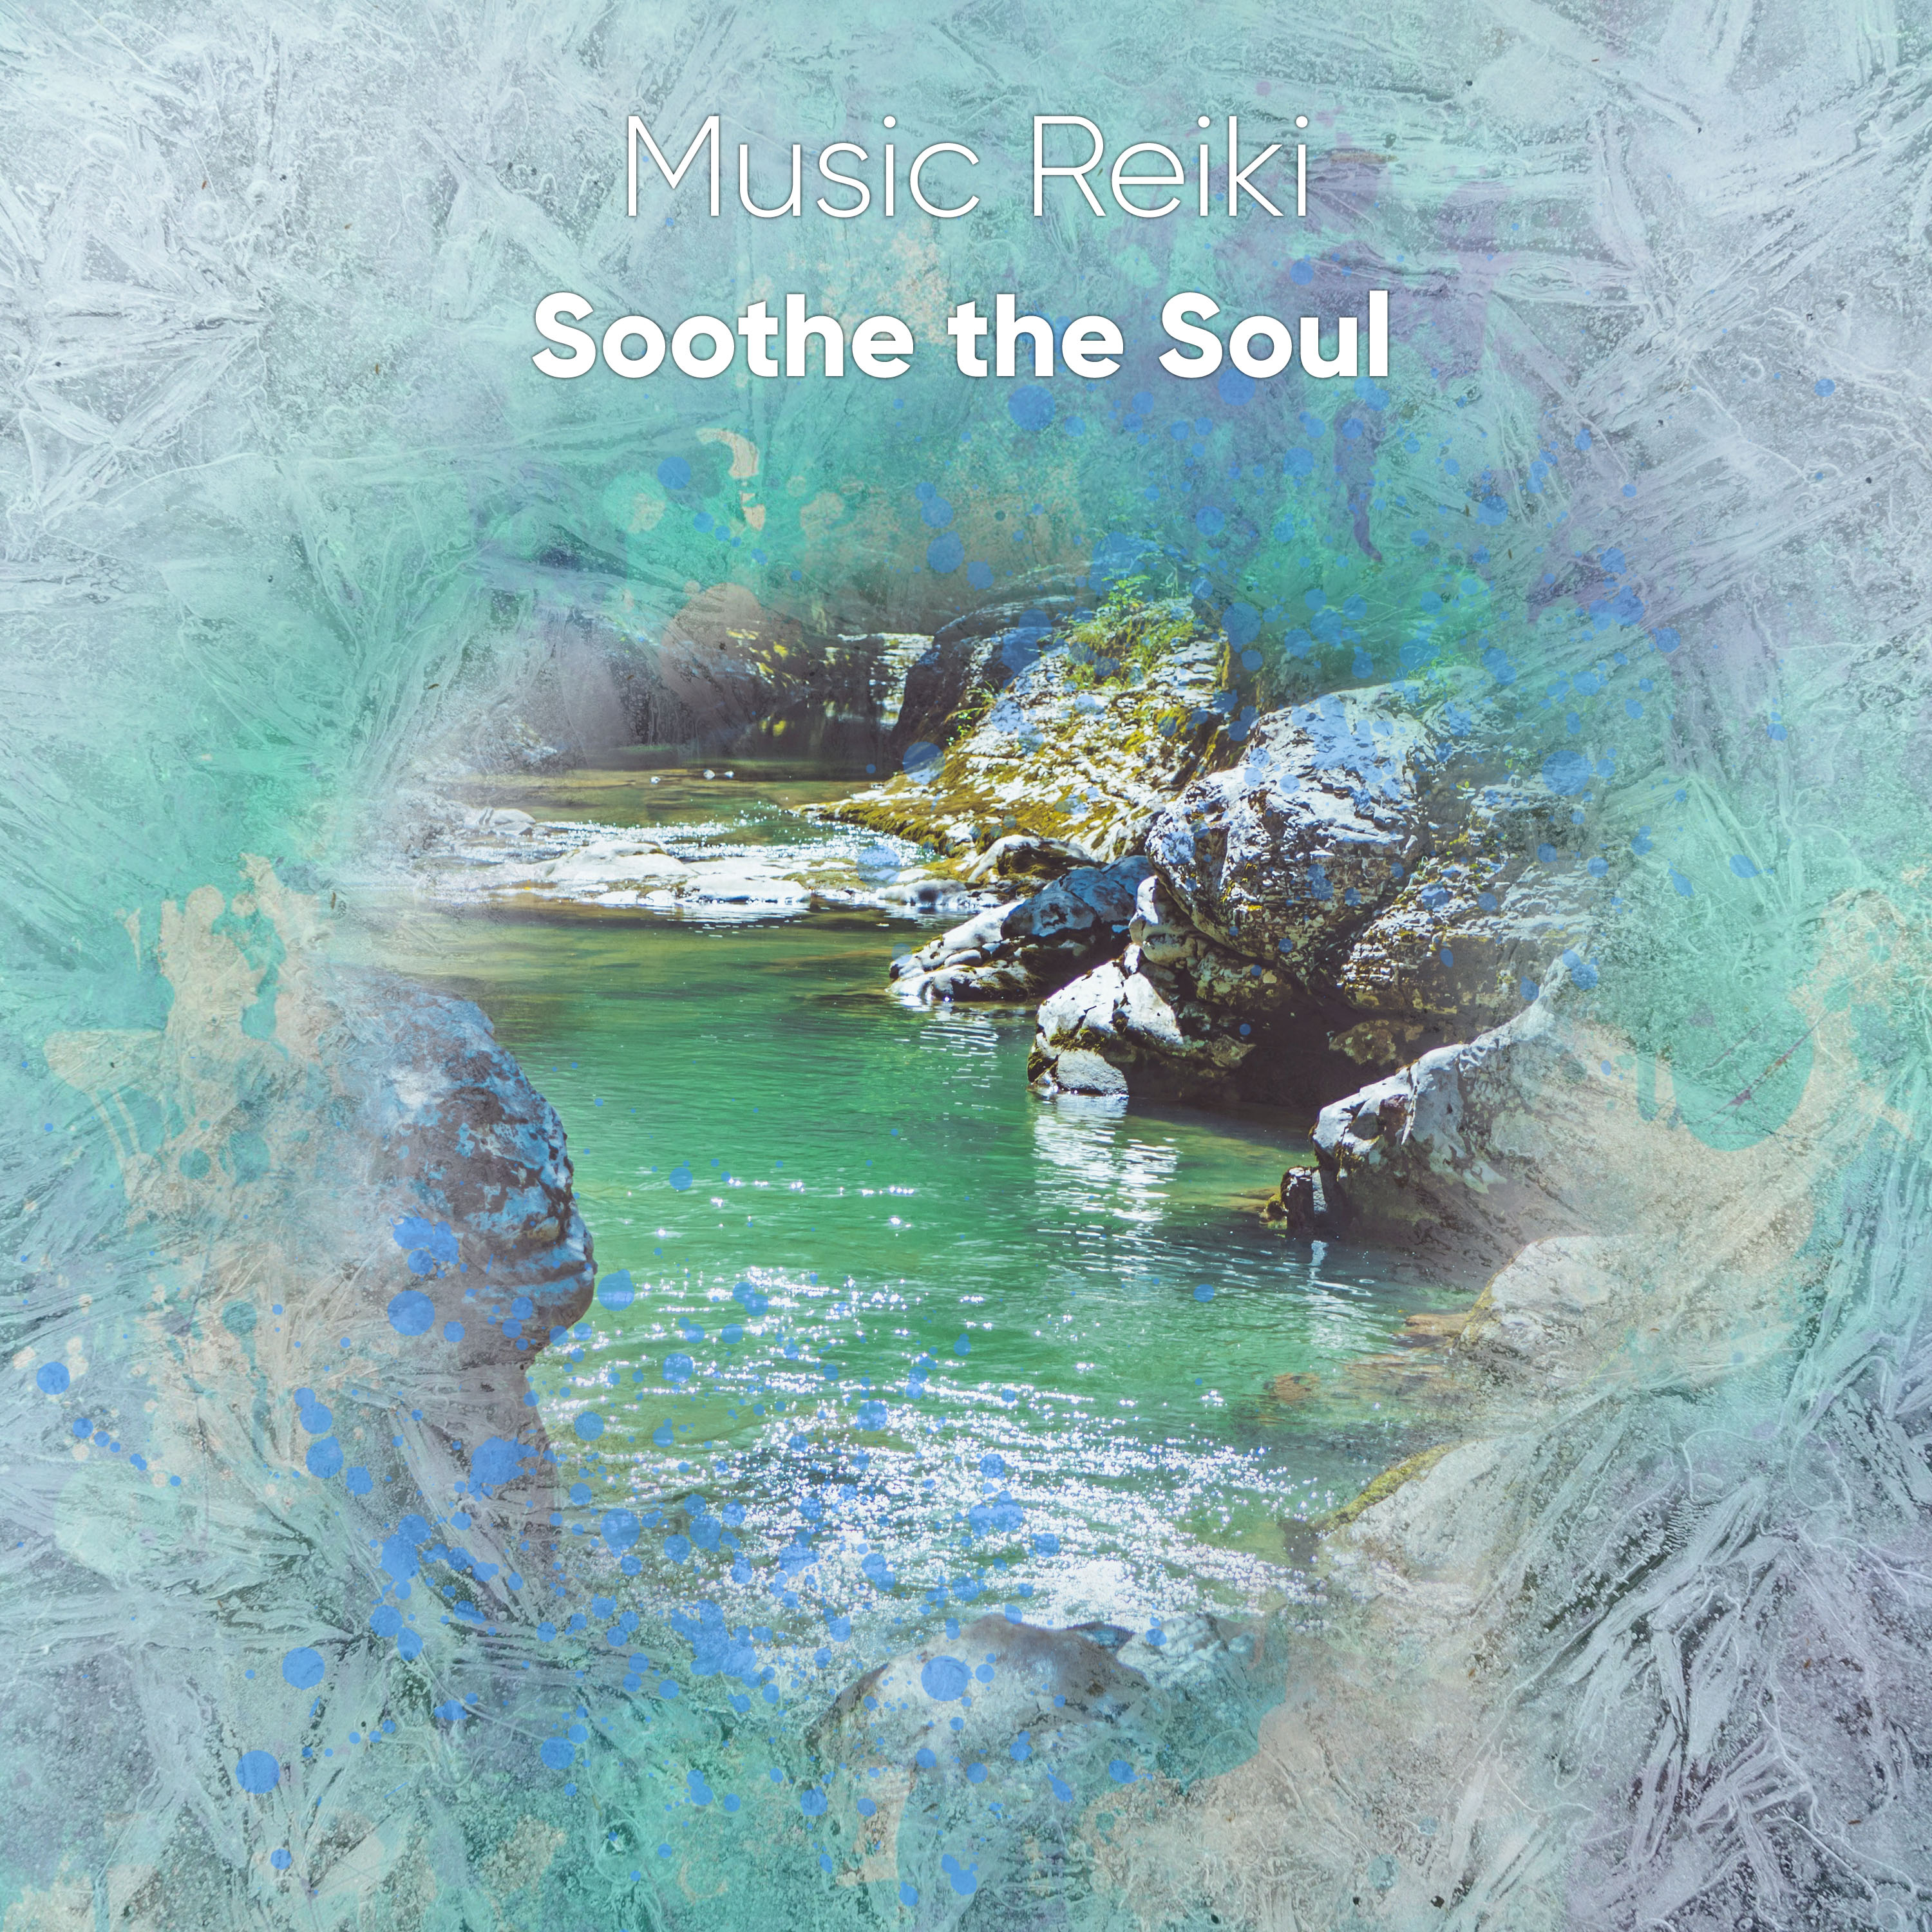 14 Music Reiki Trakcs to Soothe the Soul